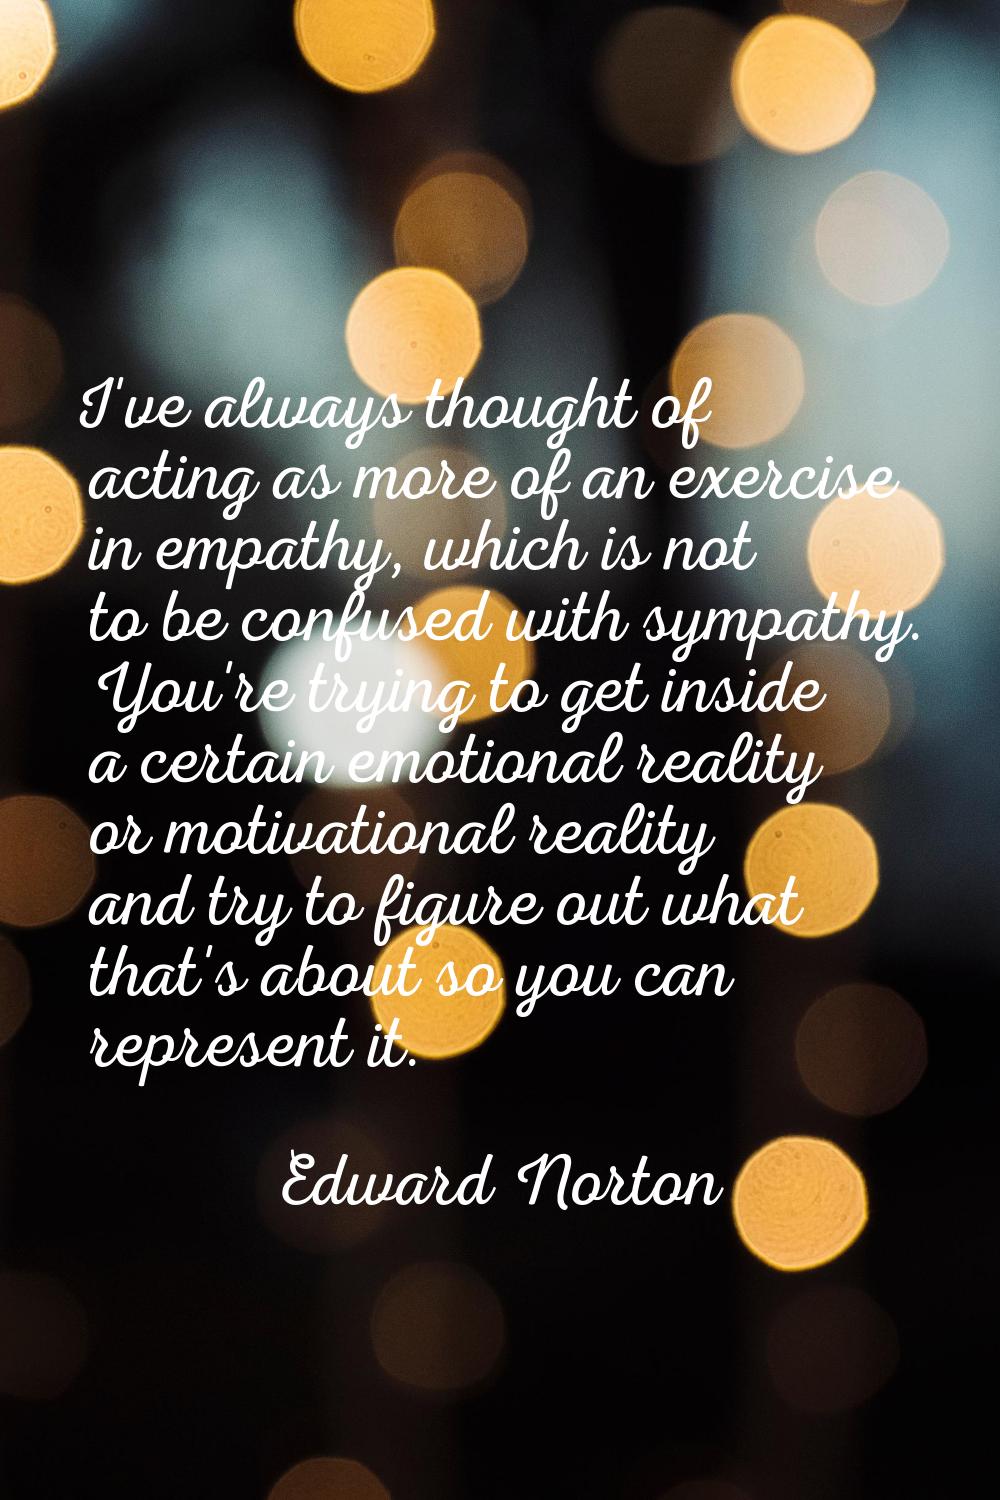 I've always thought of acting as more of an exercise in empathy, which is not to be confused with s